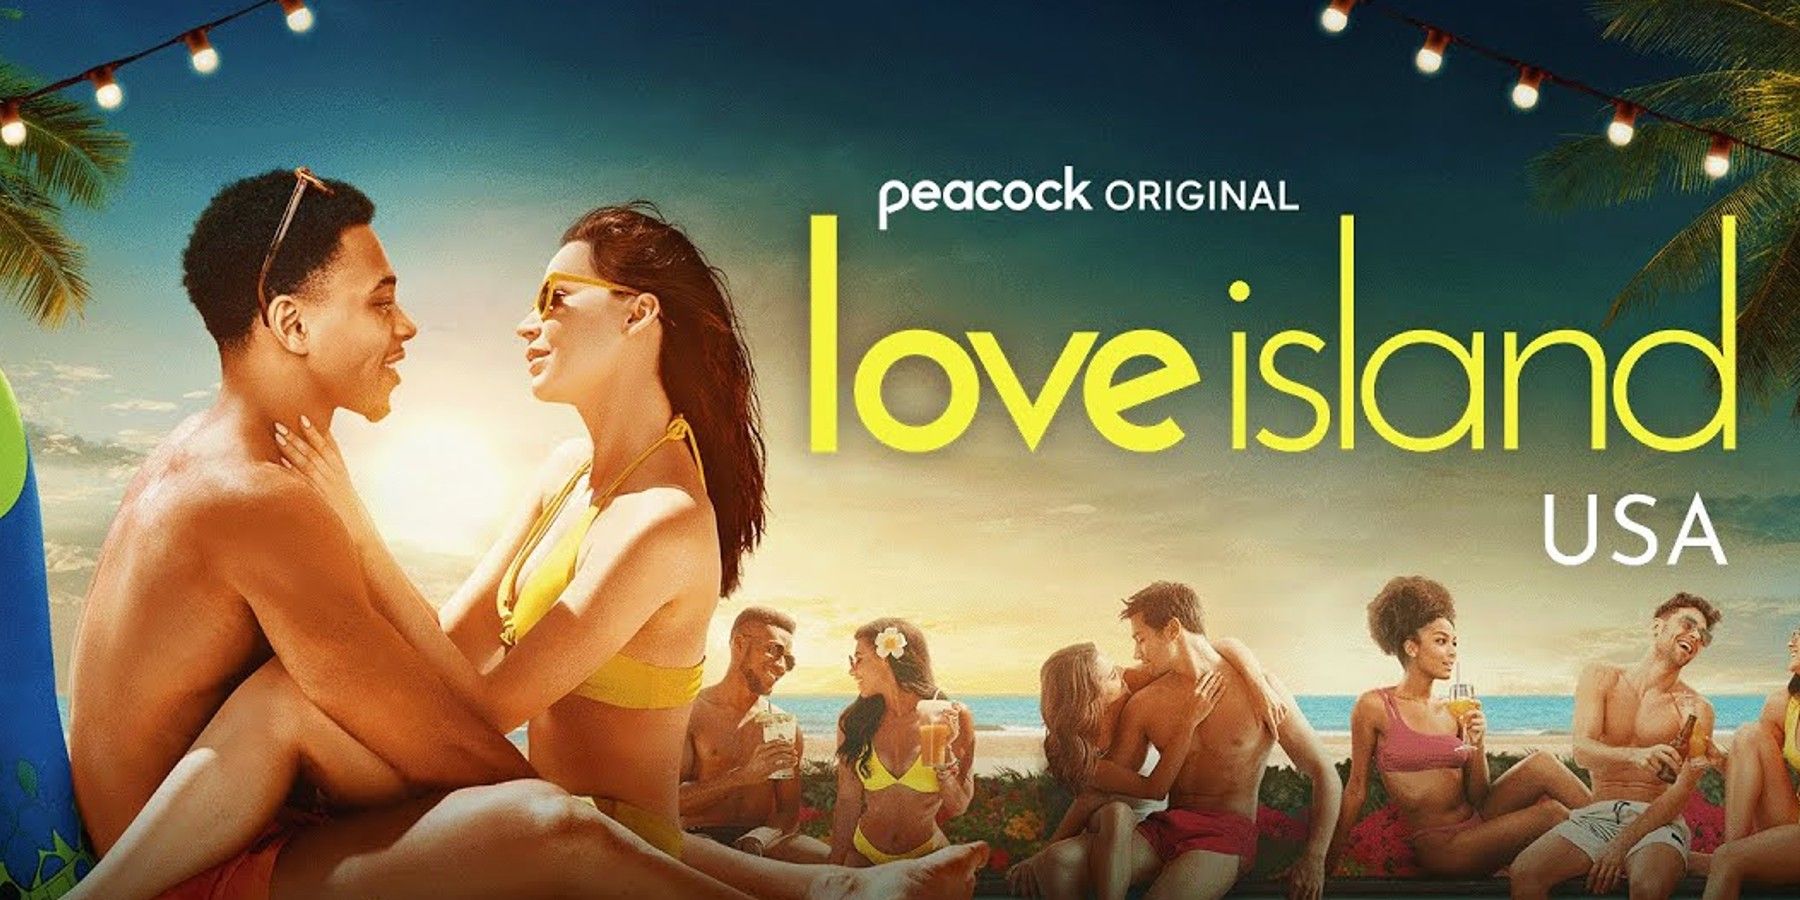 Young singles flirt in a promotional image for Love Island USA.